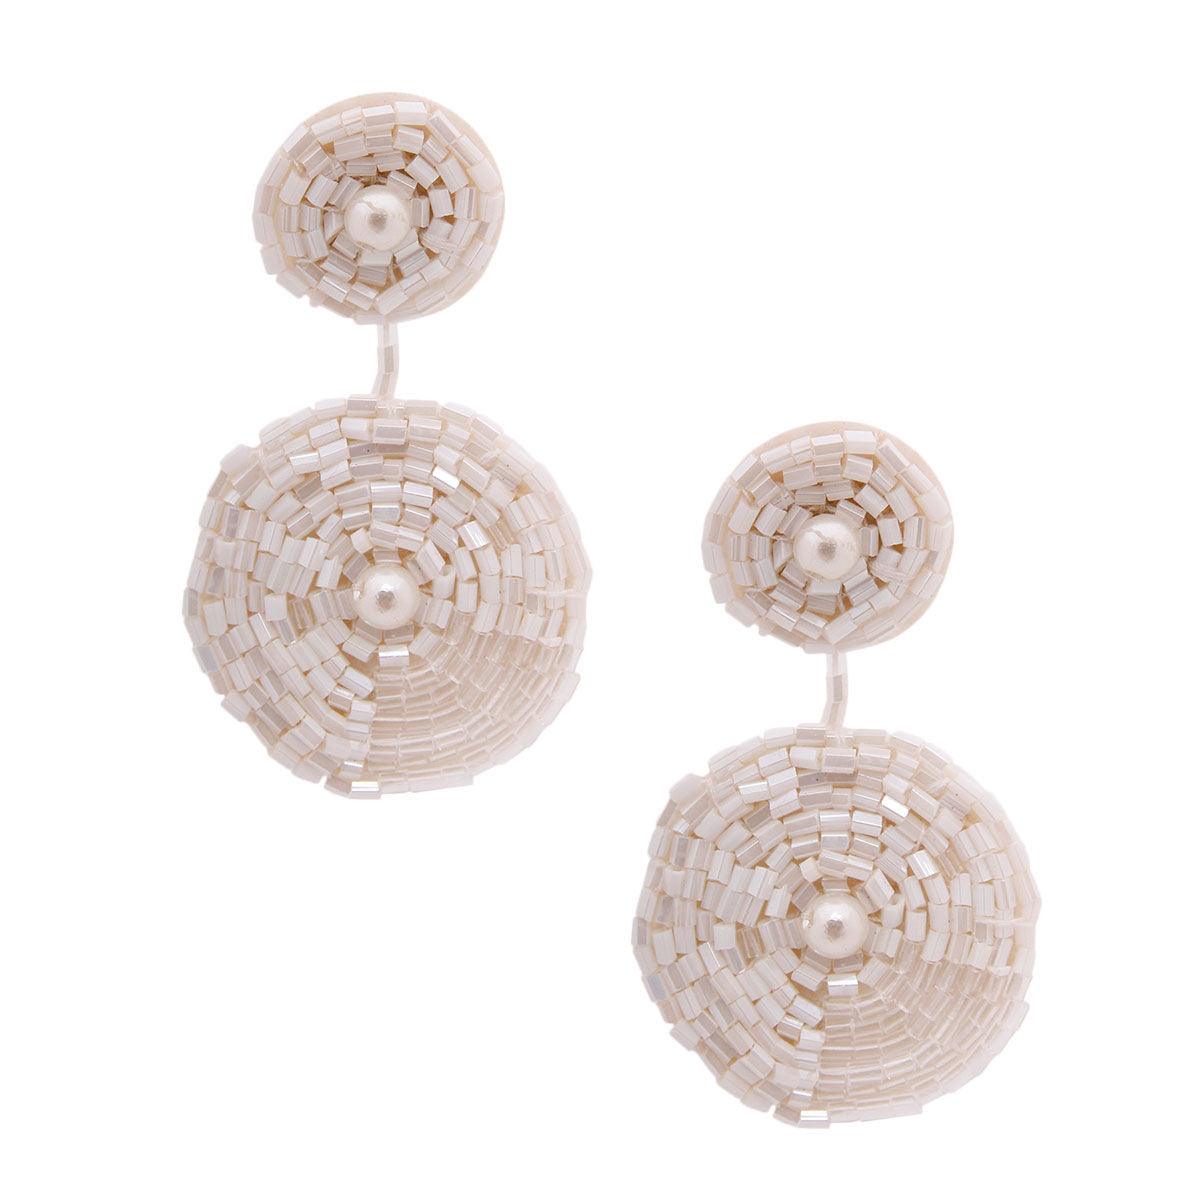 Embroidered Bead Earrings Creamy